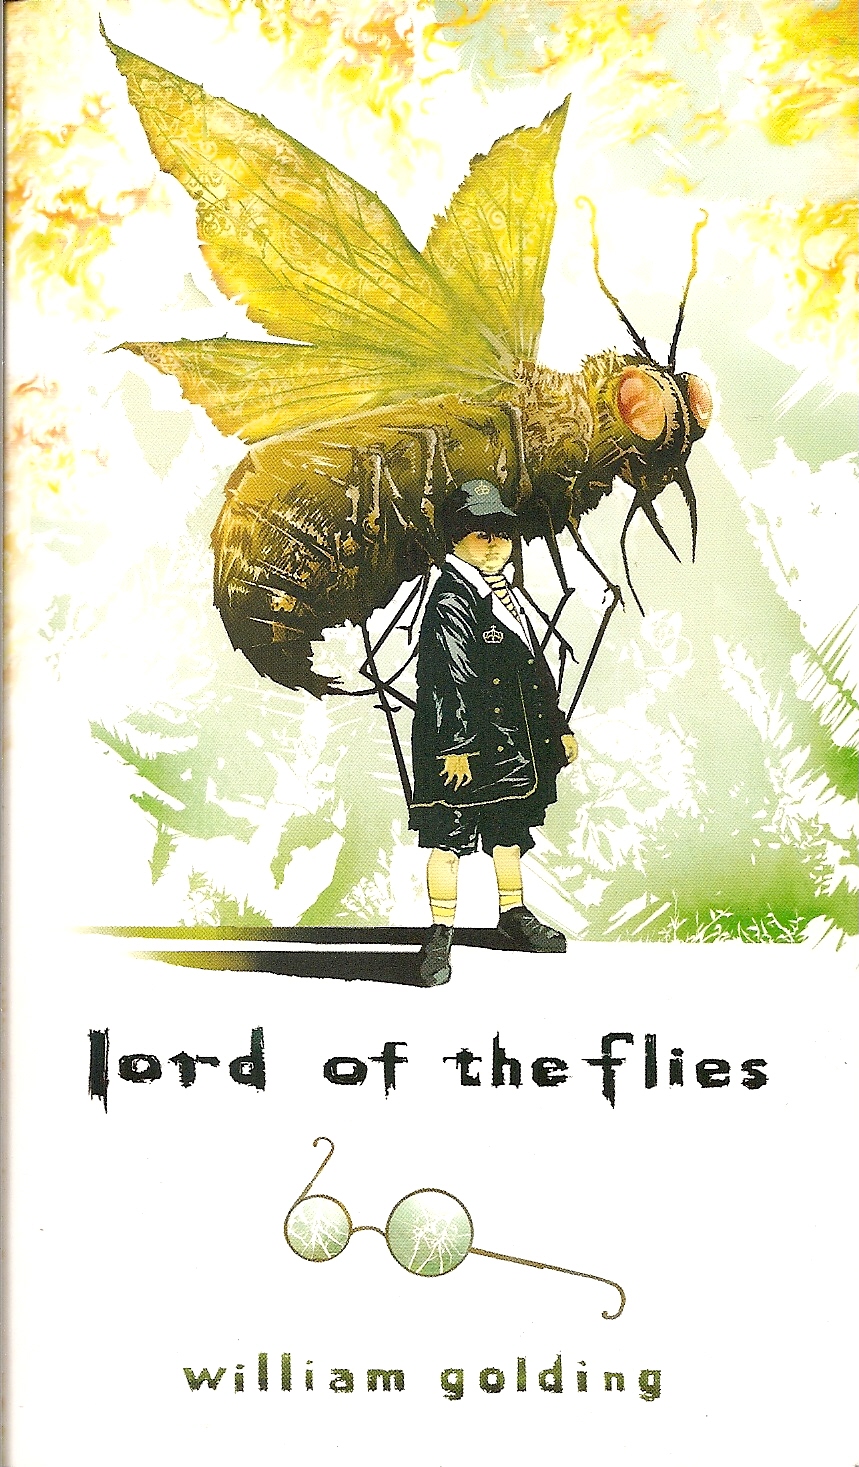 Lord Of The Flies Cover Images   Pictures   Becuo